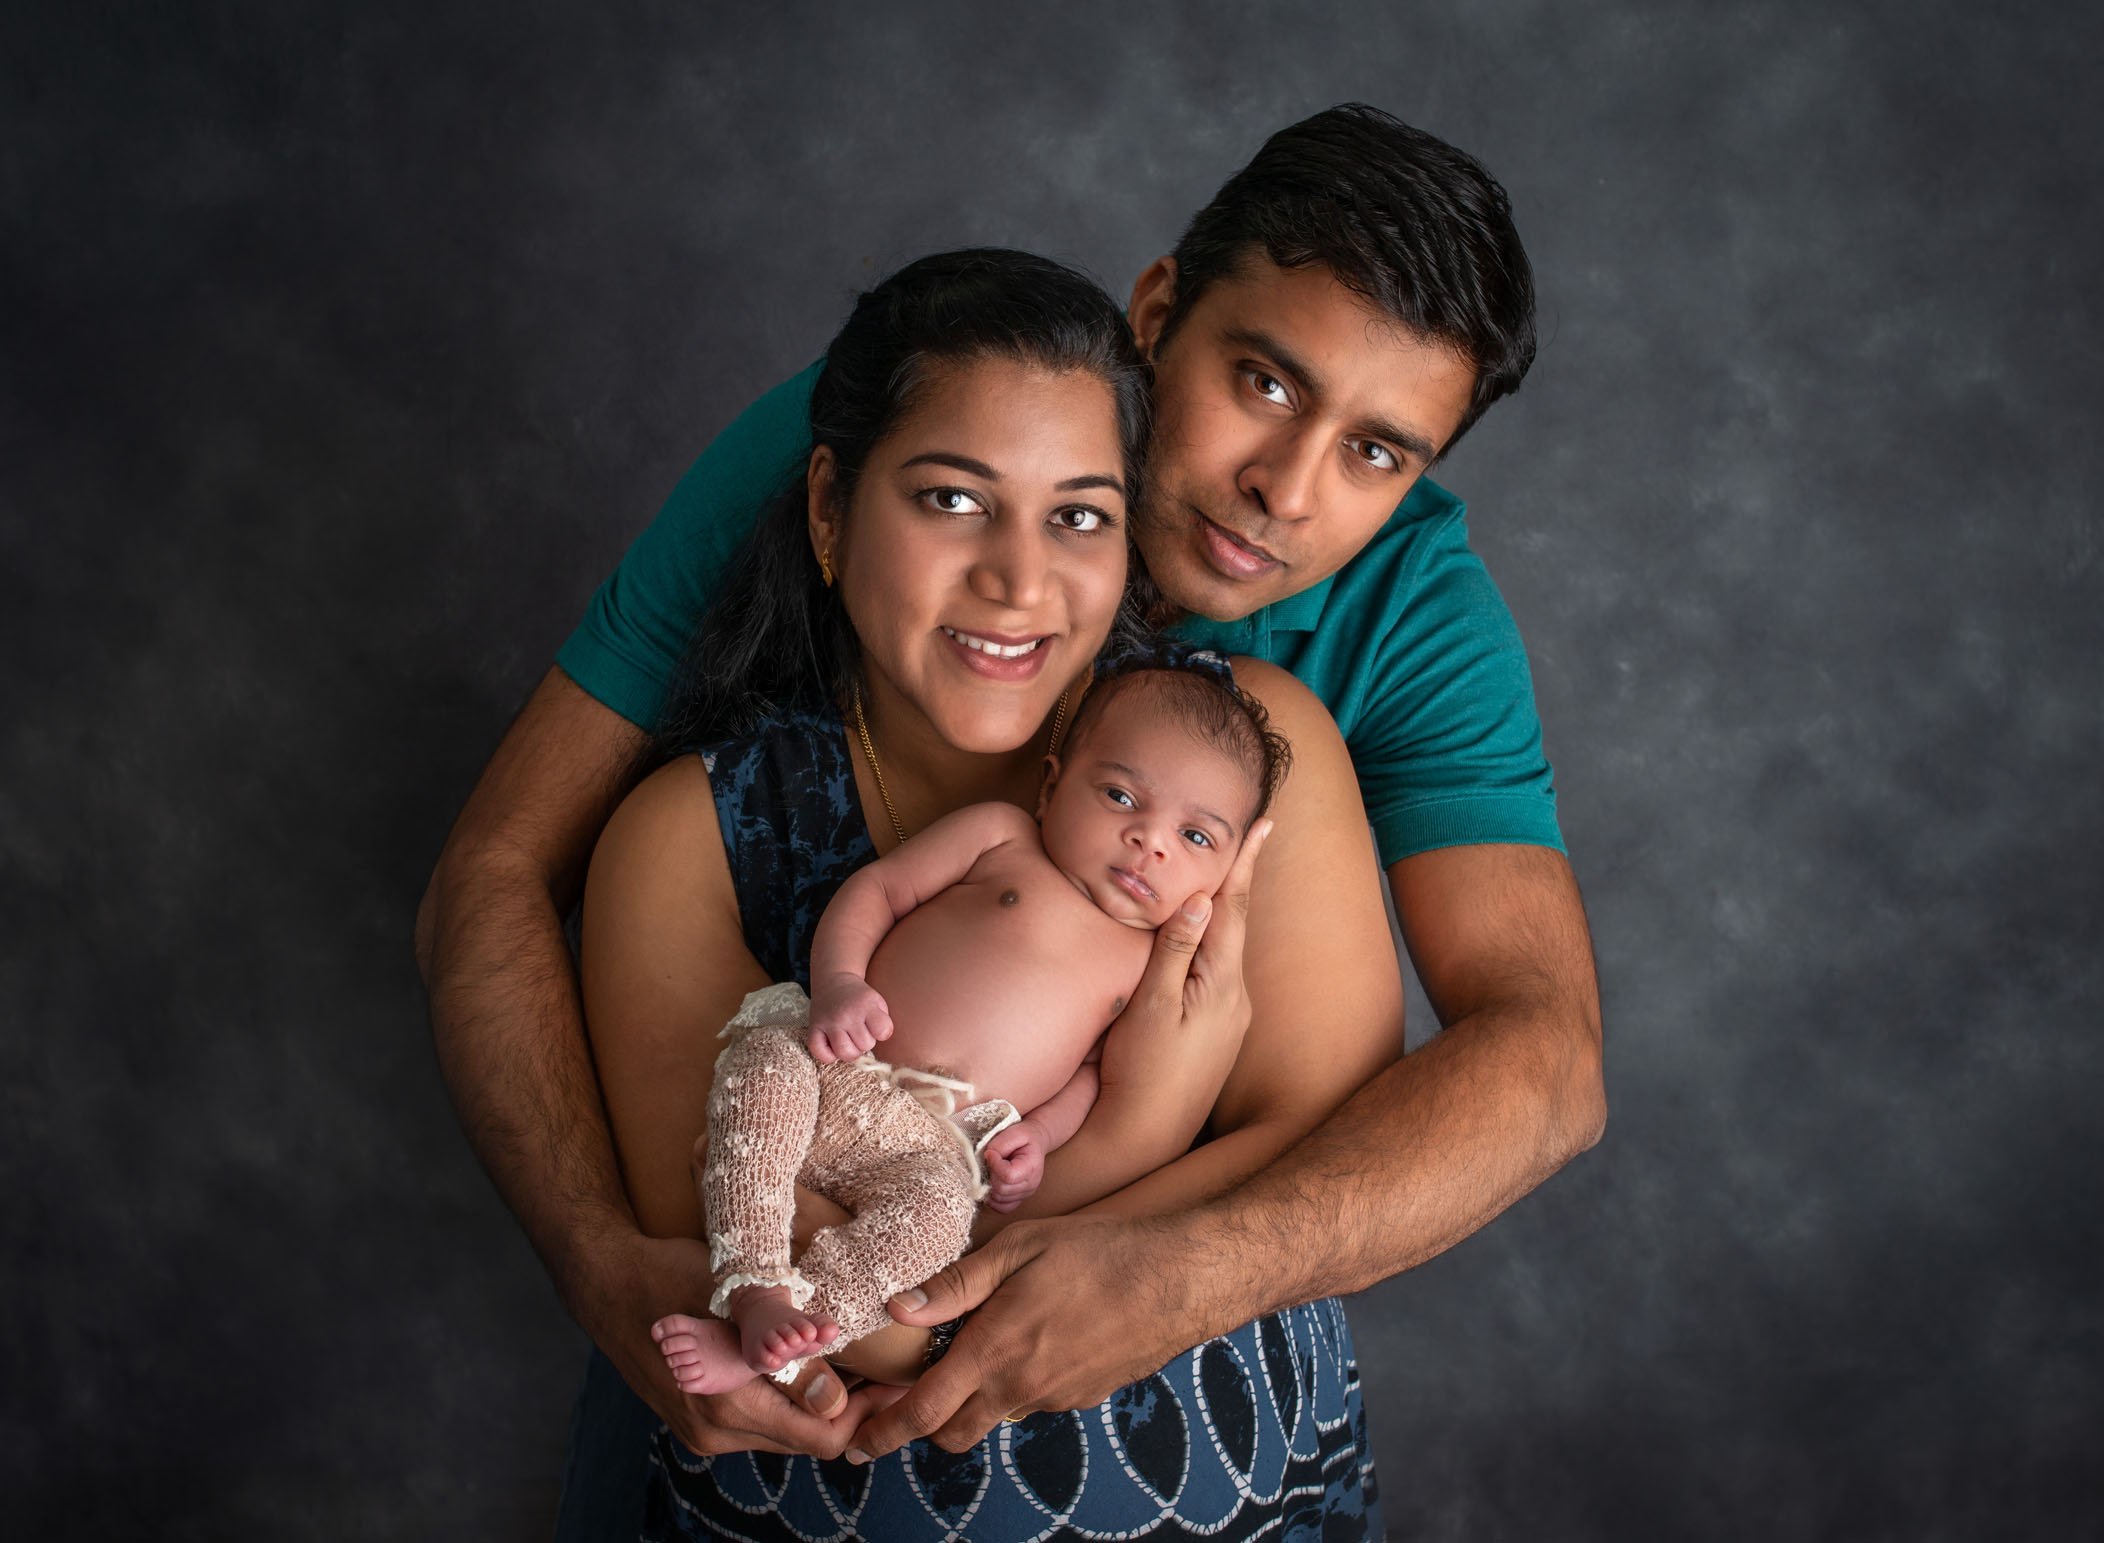 Mom Dad and newborn daughter's first portrait together